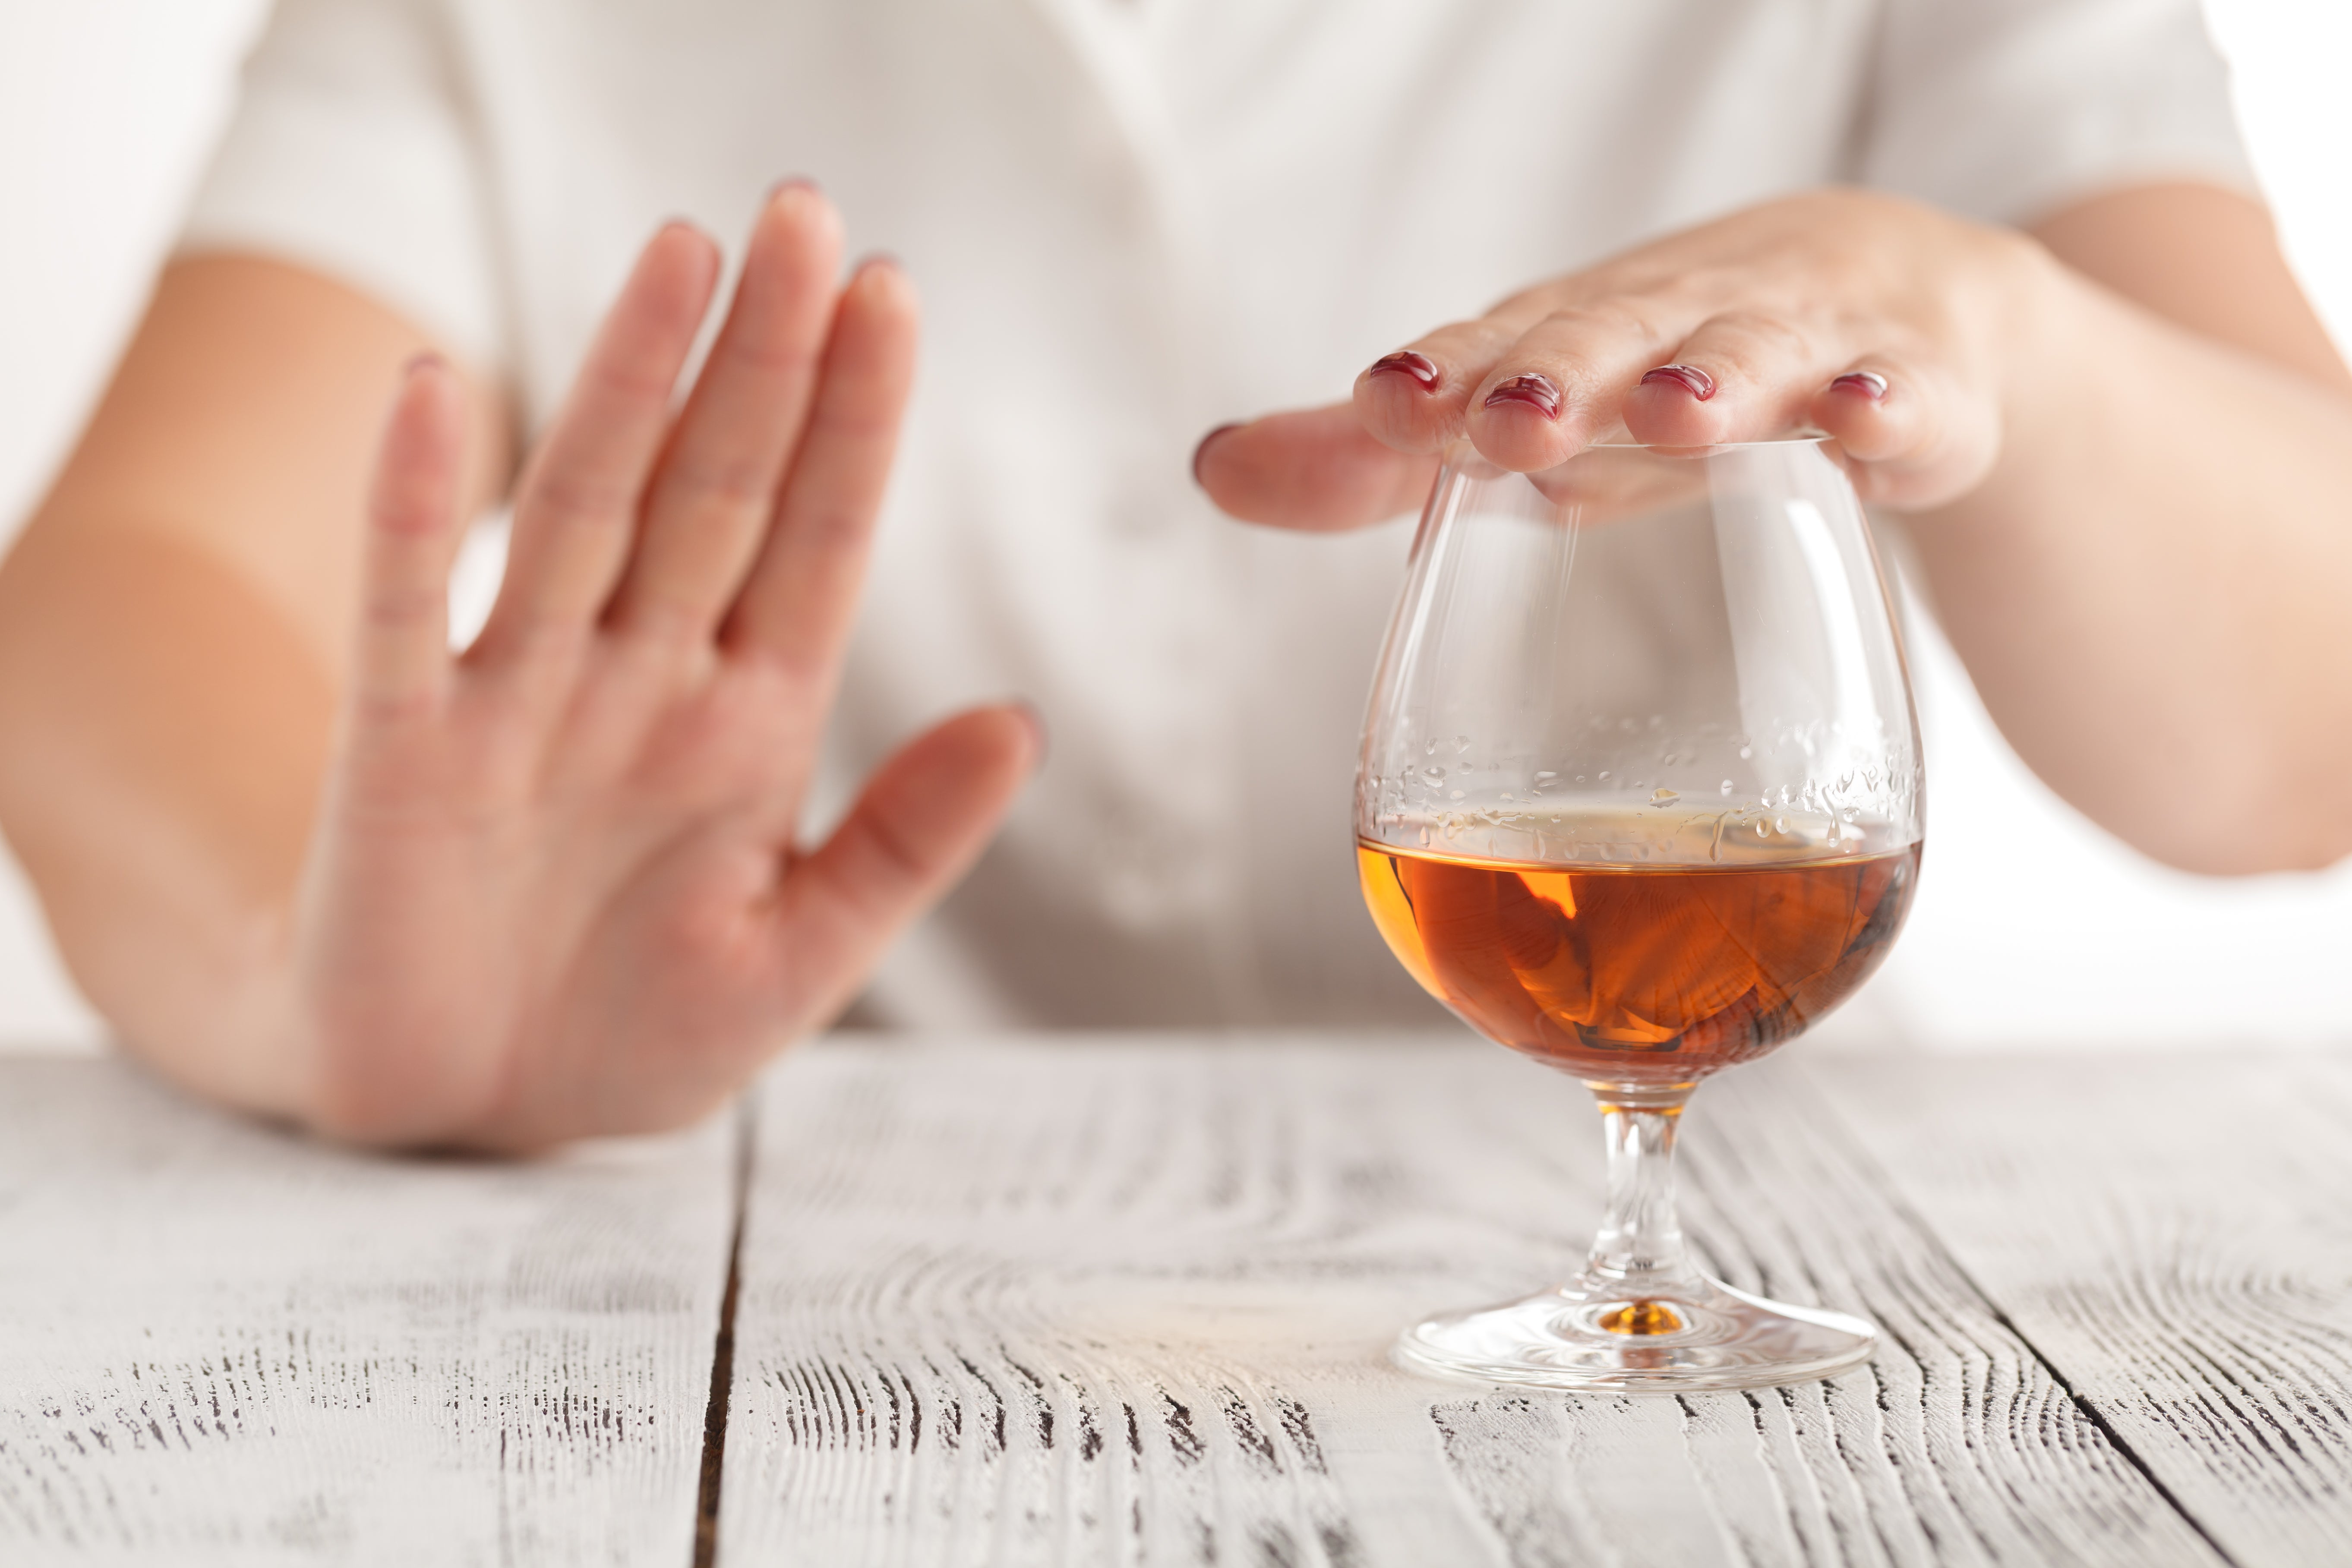 Having wildly different drinking habits can lead to disagreements in relationships